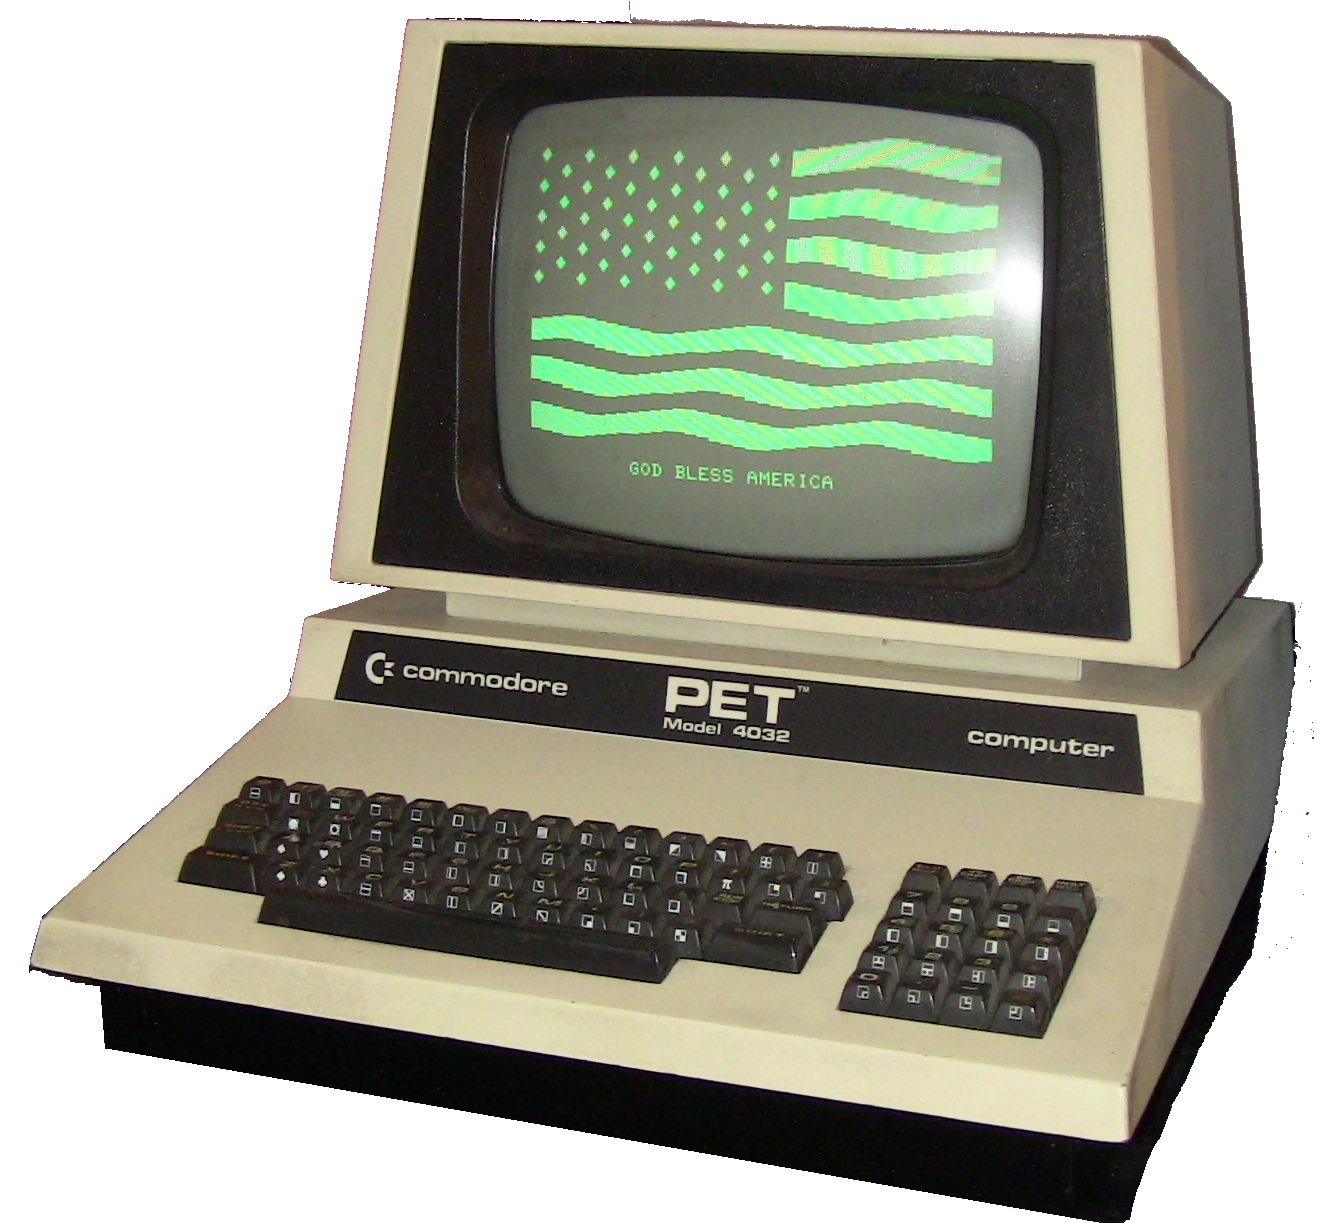 His first PC was a Commodore PET